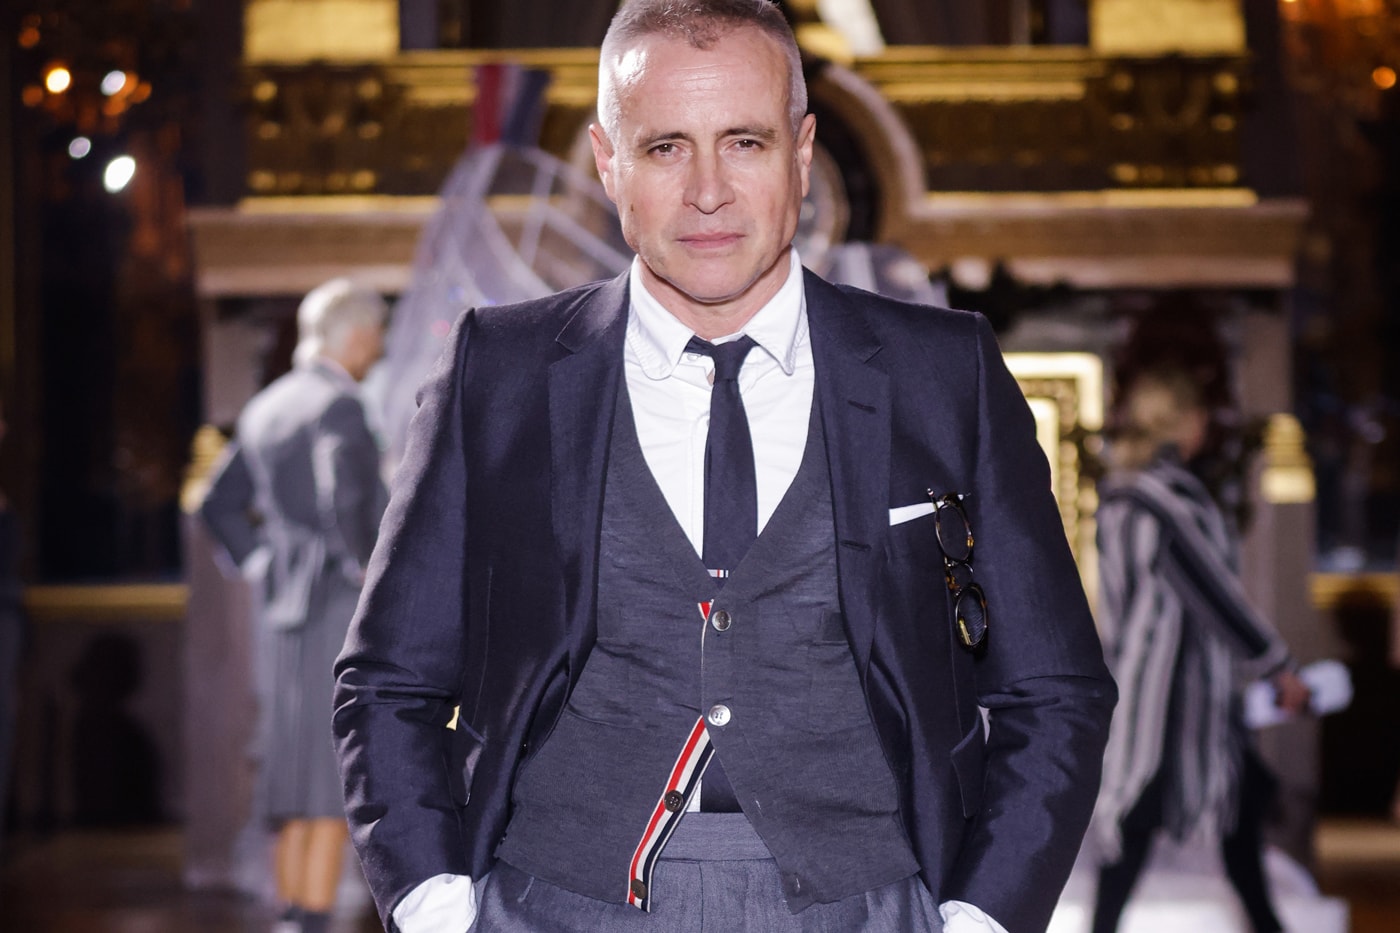 Adidas Wants New Trial Against Thom Browne Round Two Lawsuits | Hypebeast